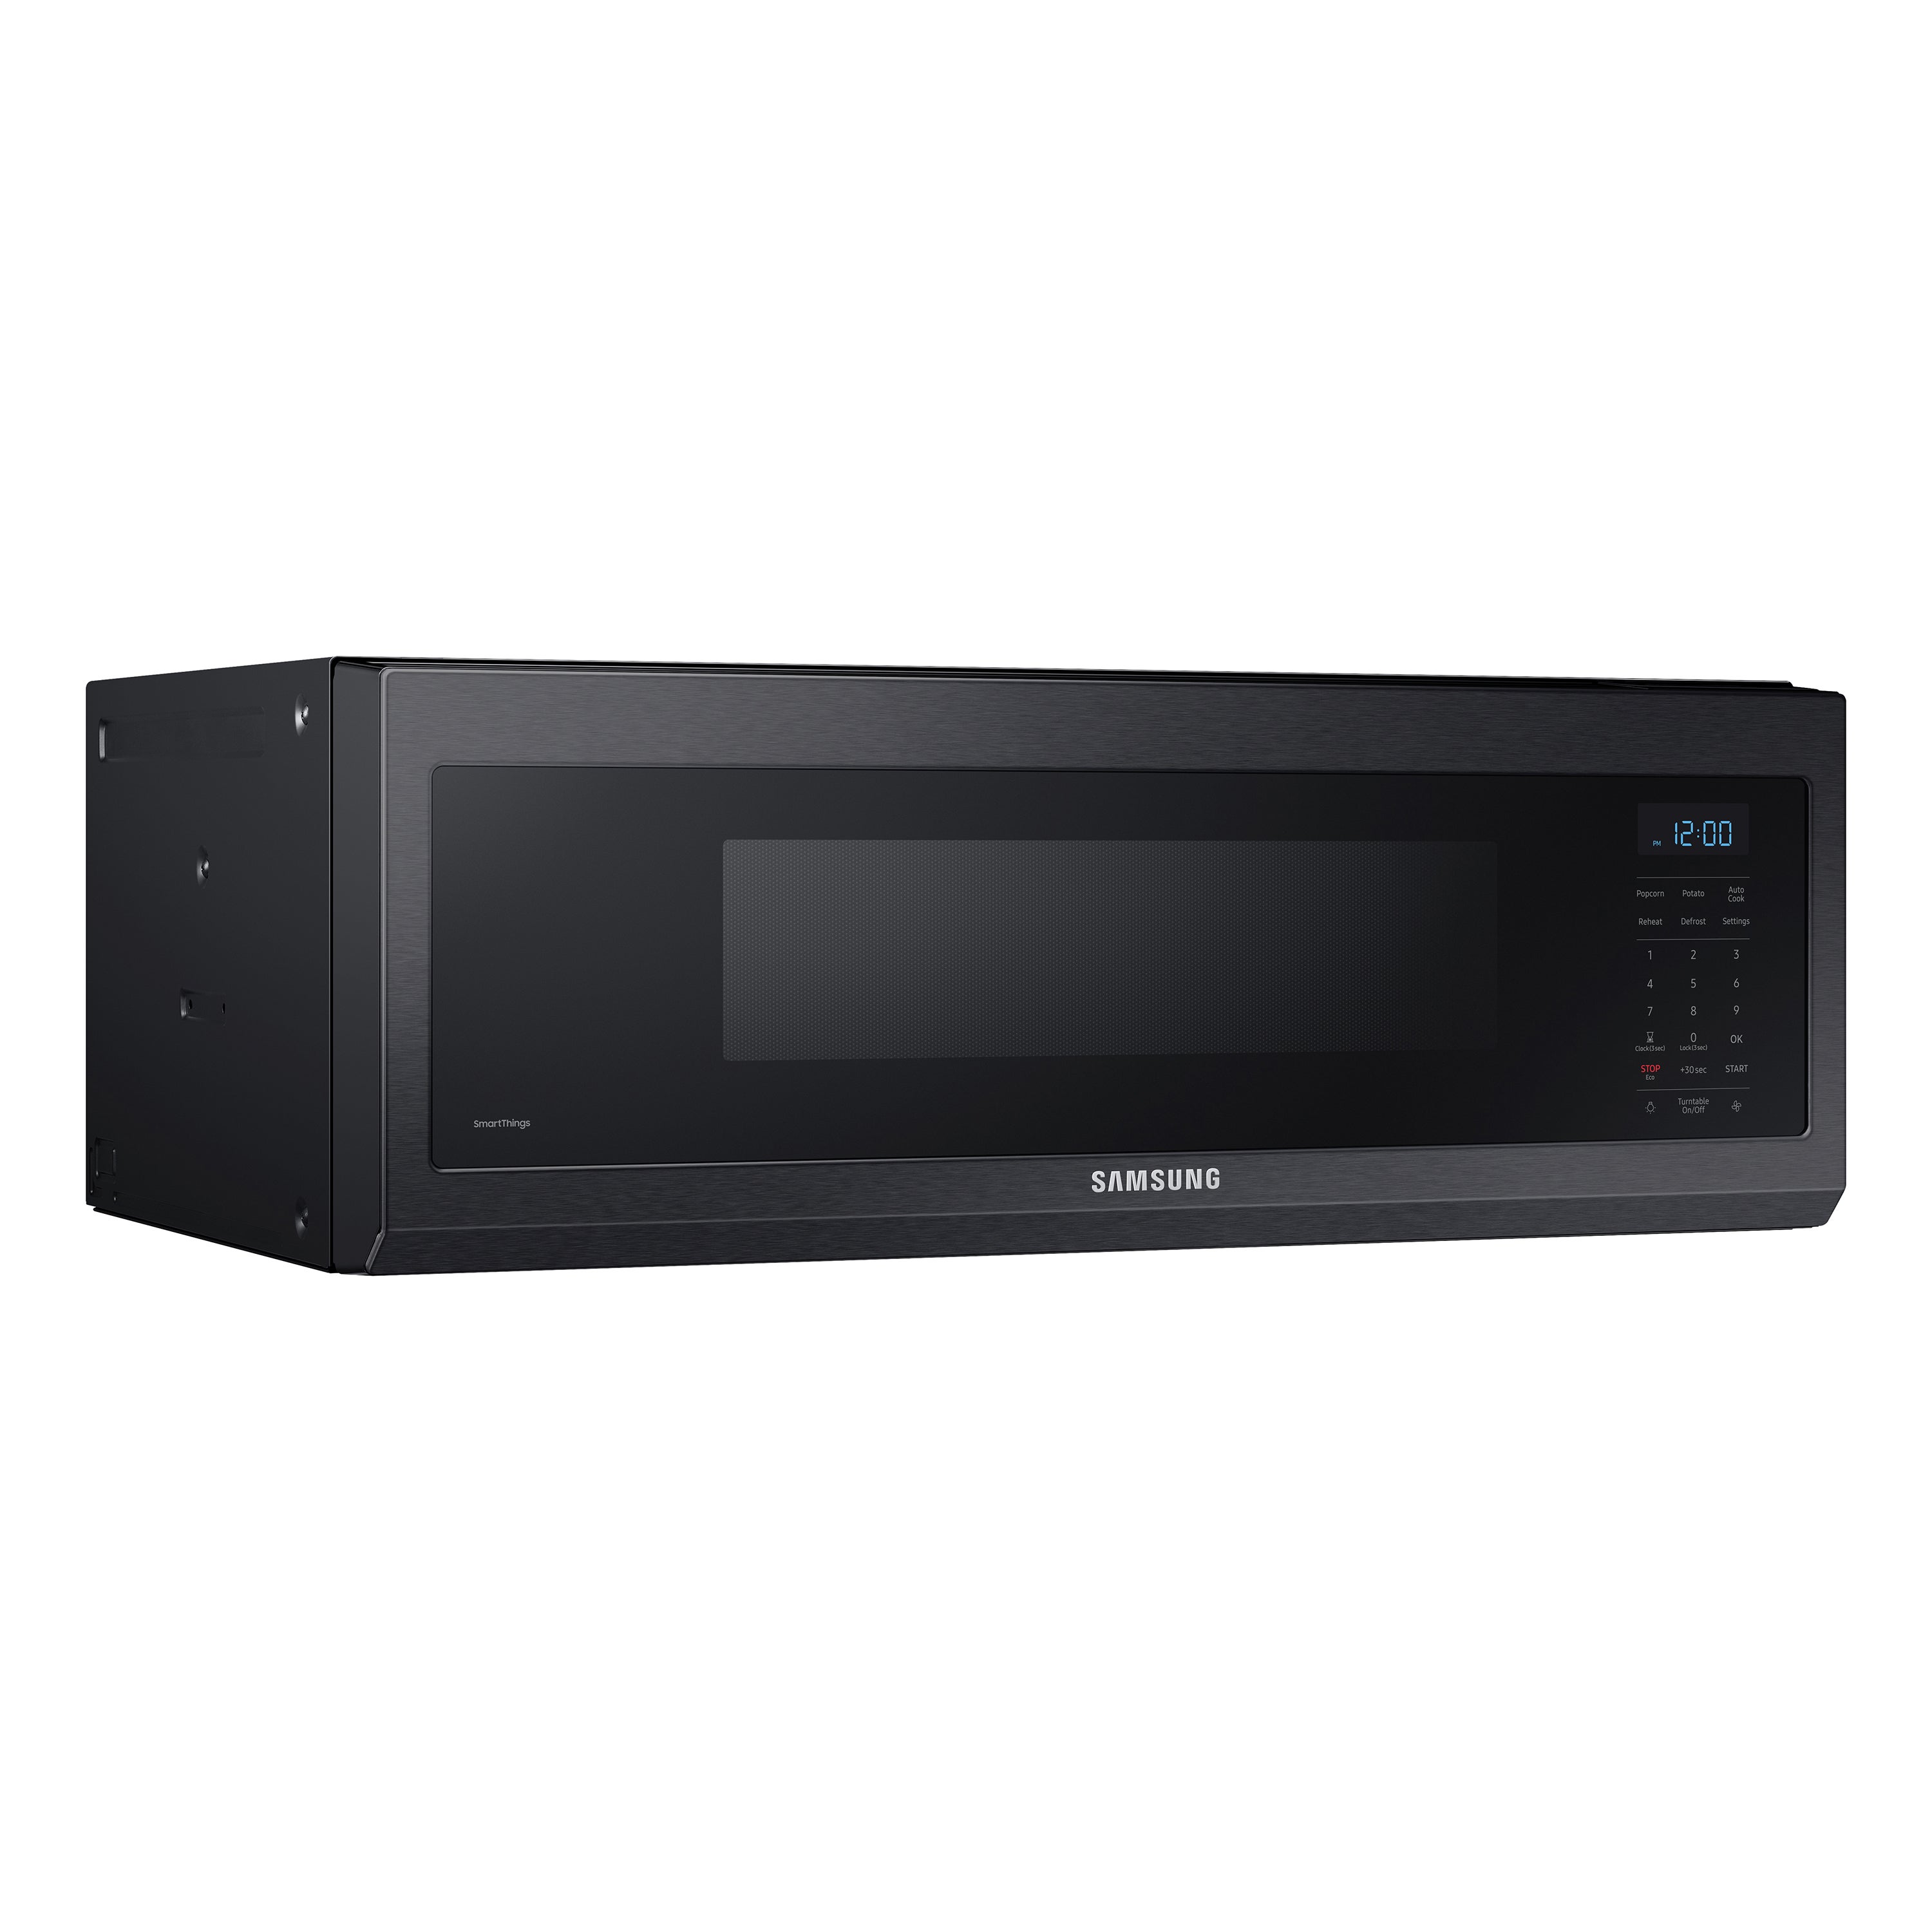 Samsung - 1.1 Cu. ft. Smart Slim Over-the-range Microwave with 400 CFM Hood Ventilation, Wi-Fi & Voice Control - Black Stainless Steel